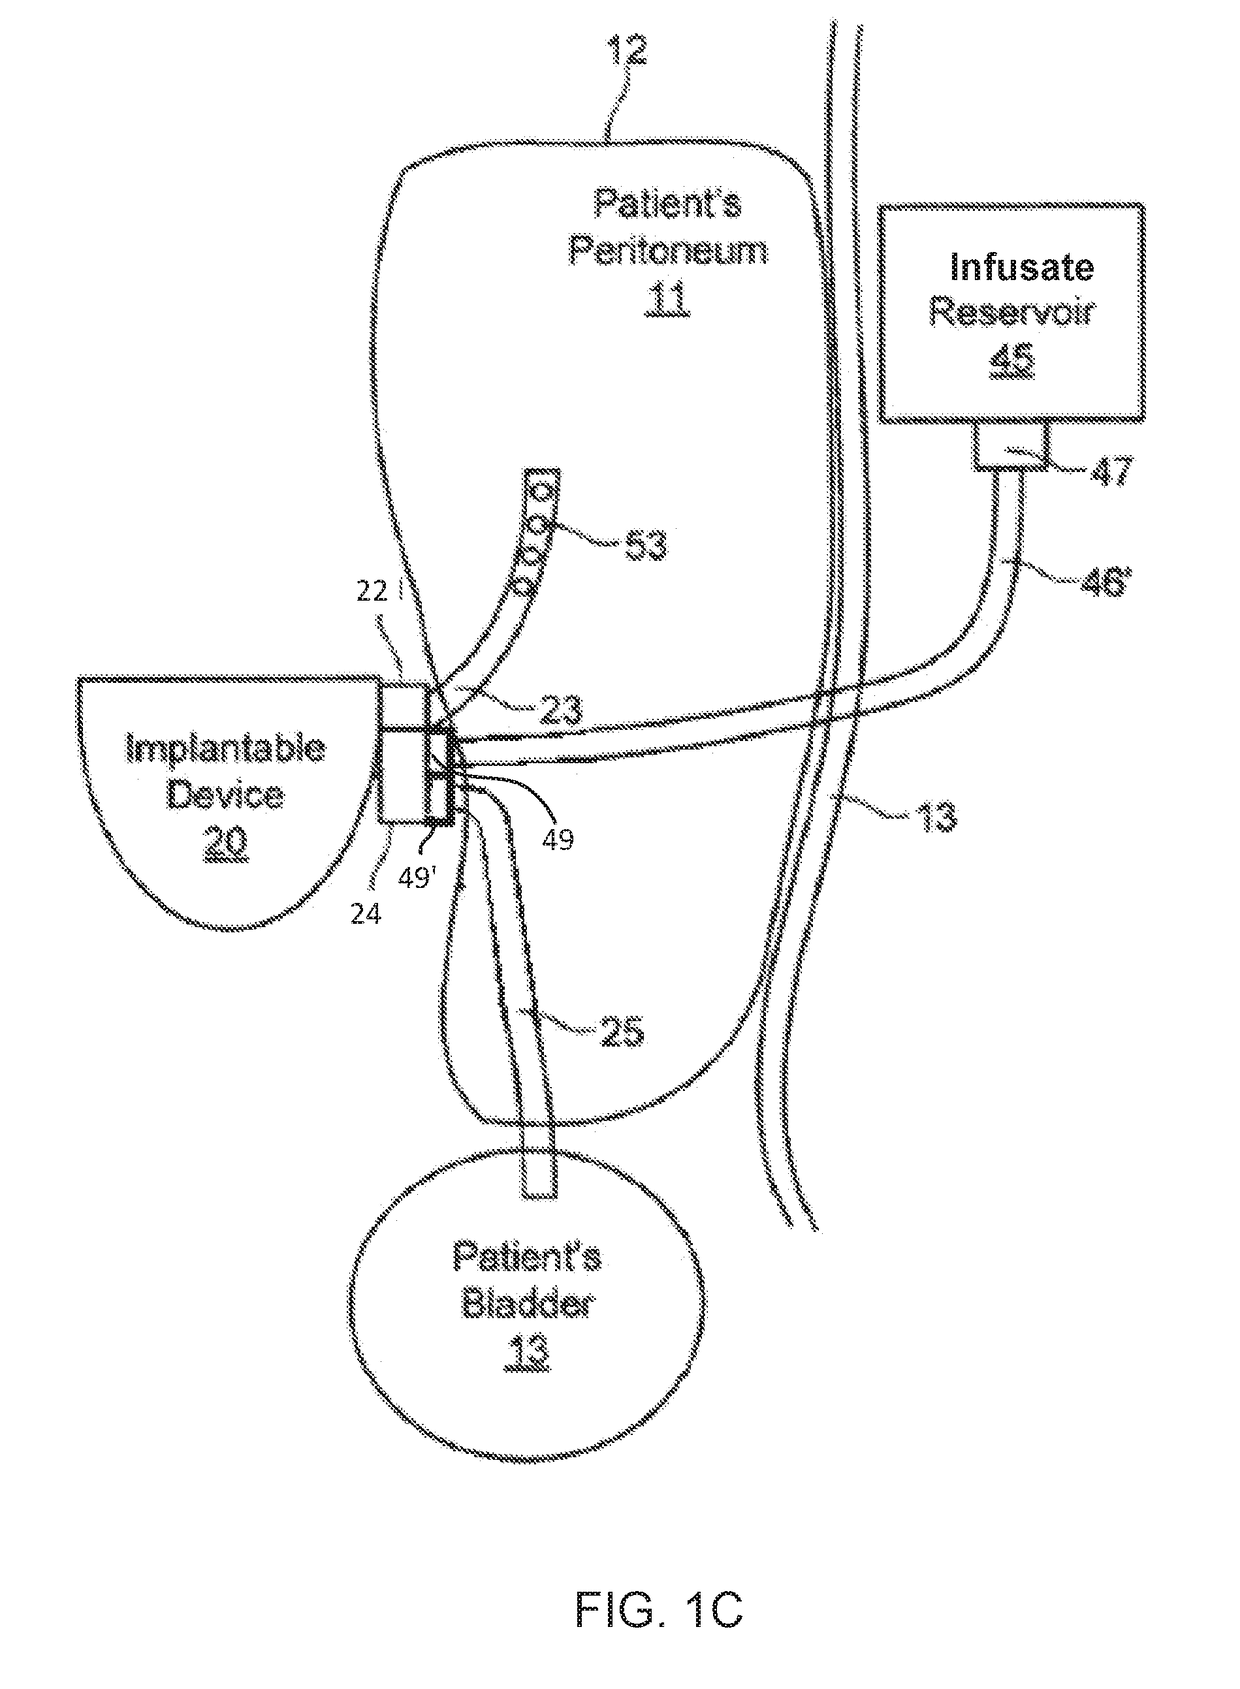 Direct sodium removal method, solution and apparatus to reduce fluid overload in heart failure patients